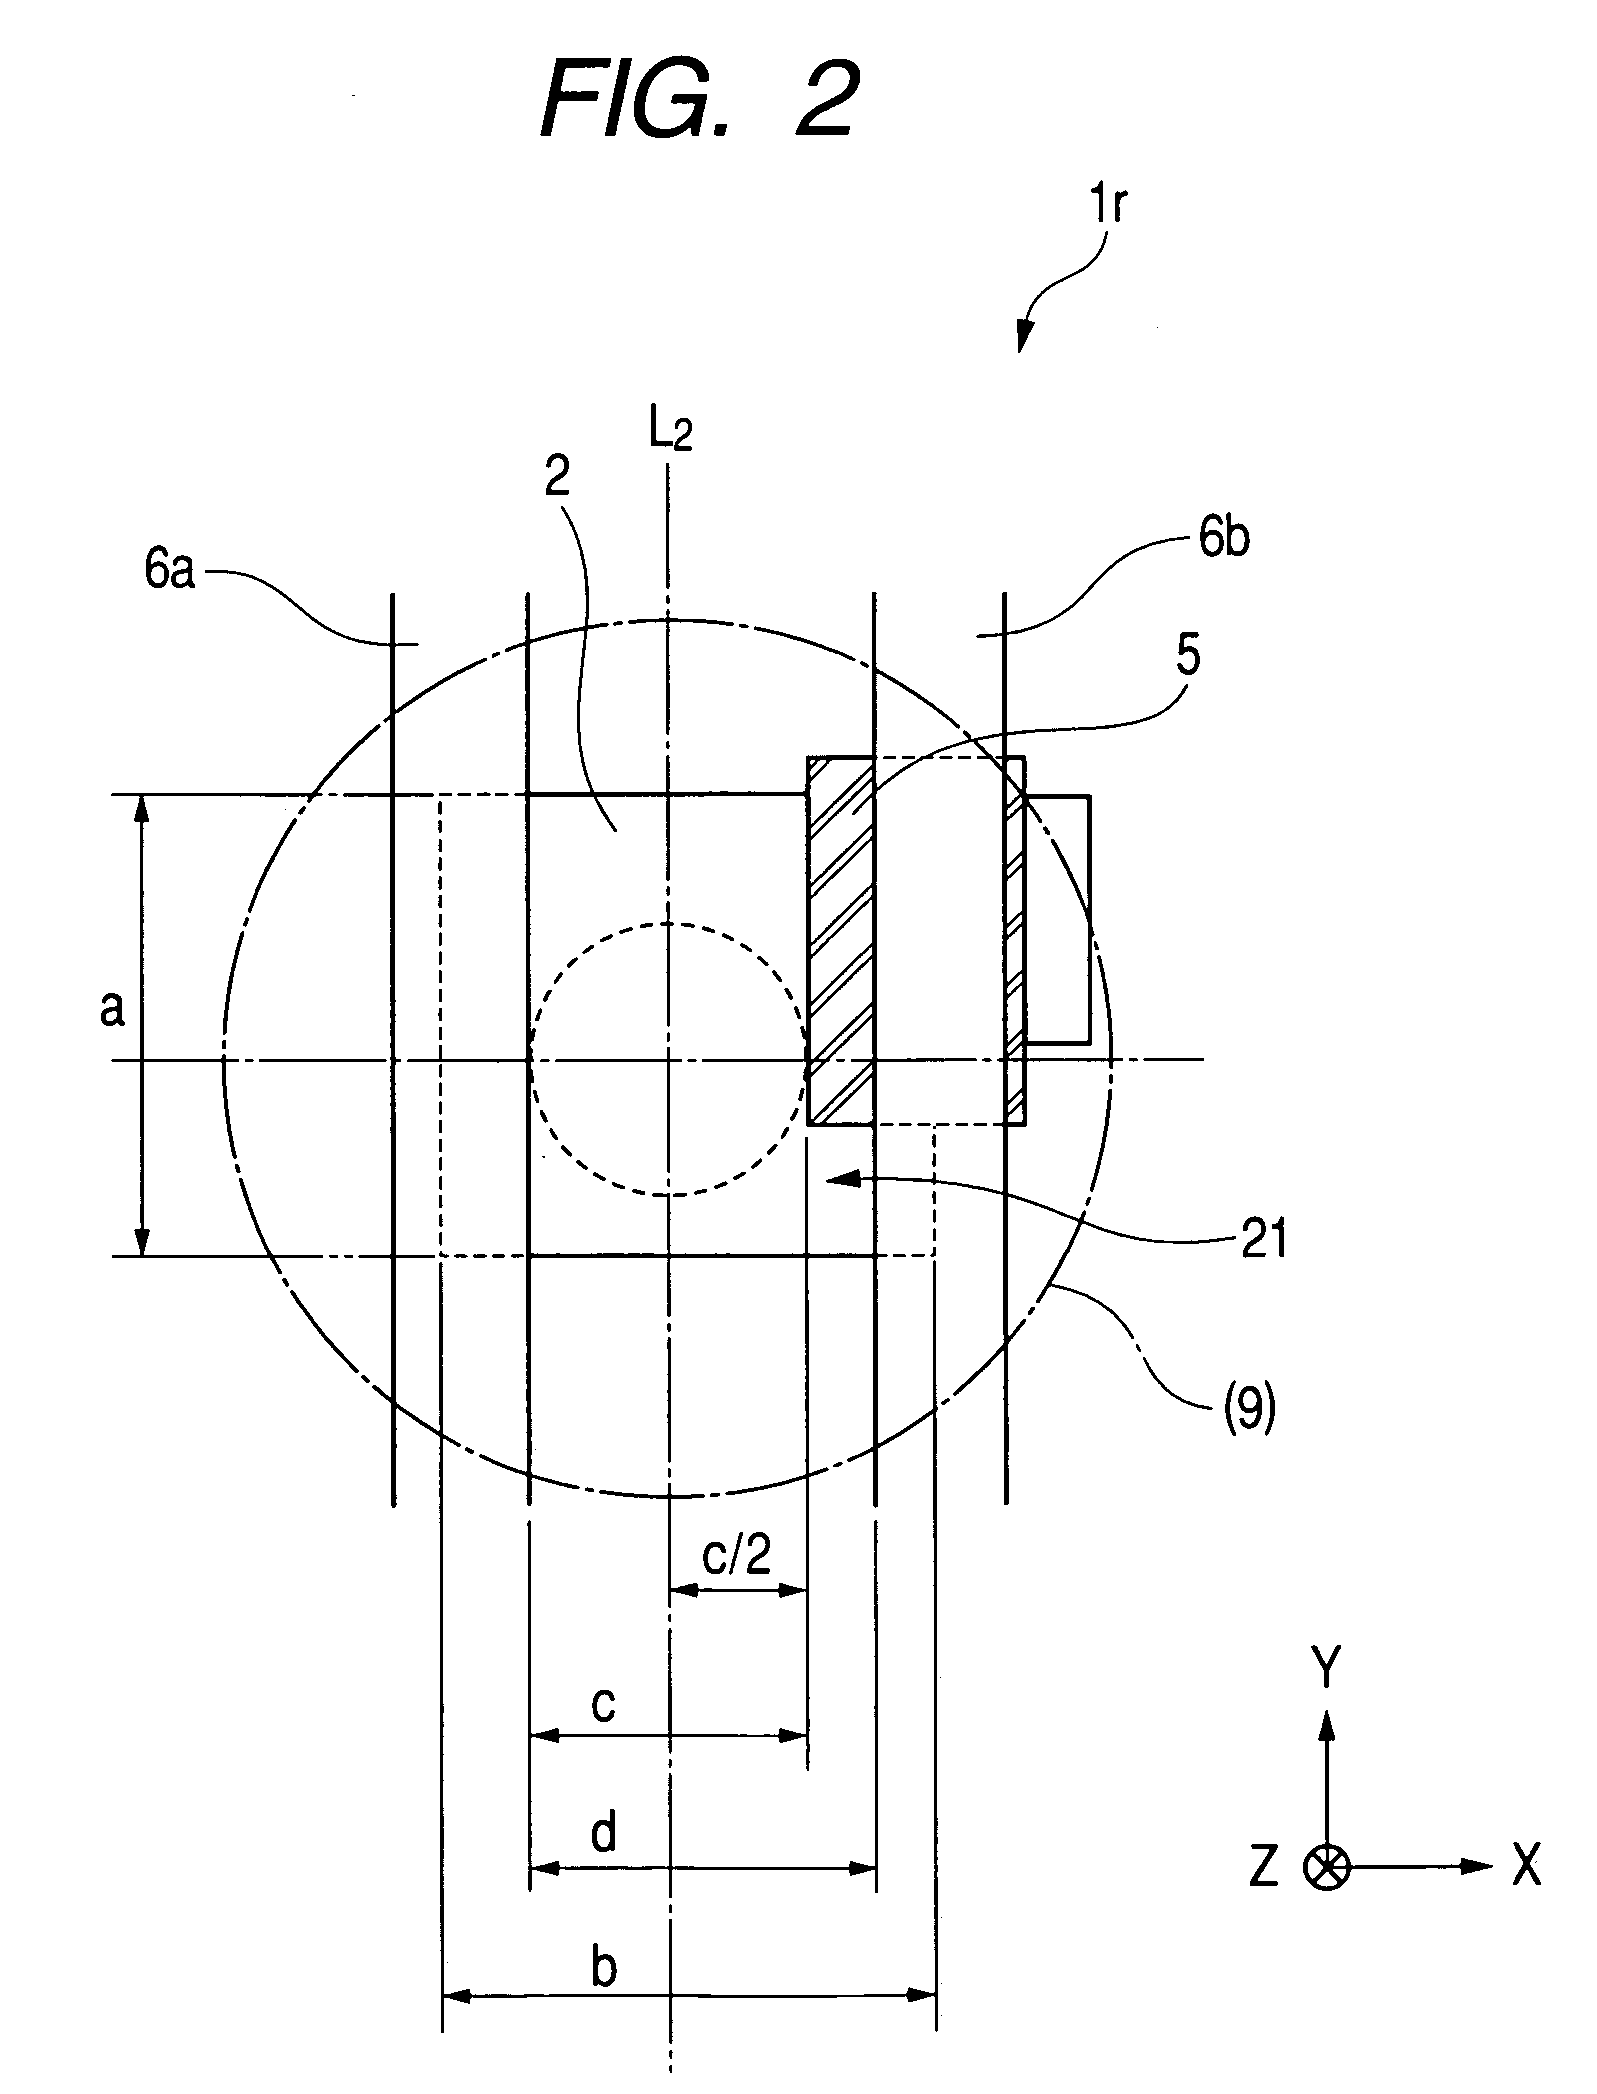 Image pick-up device having well structure and image pick-up system using the image pick-up device